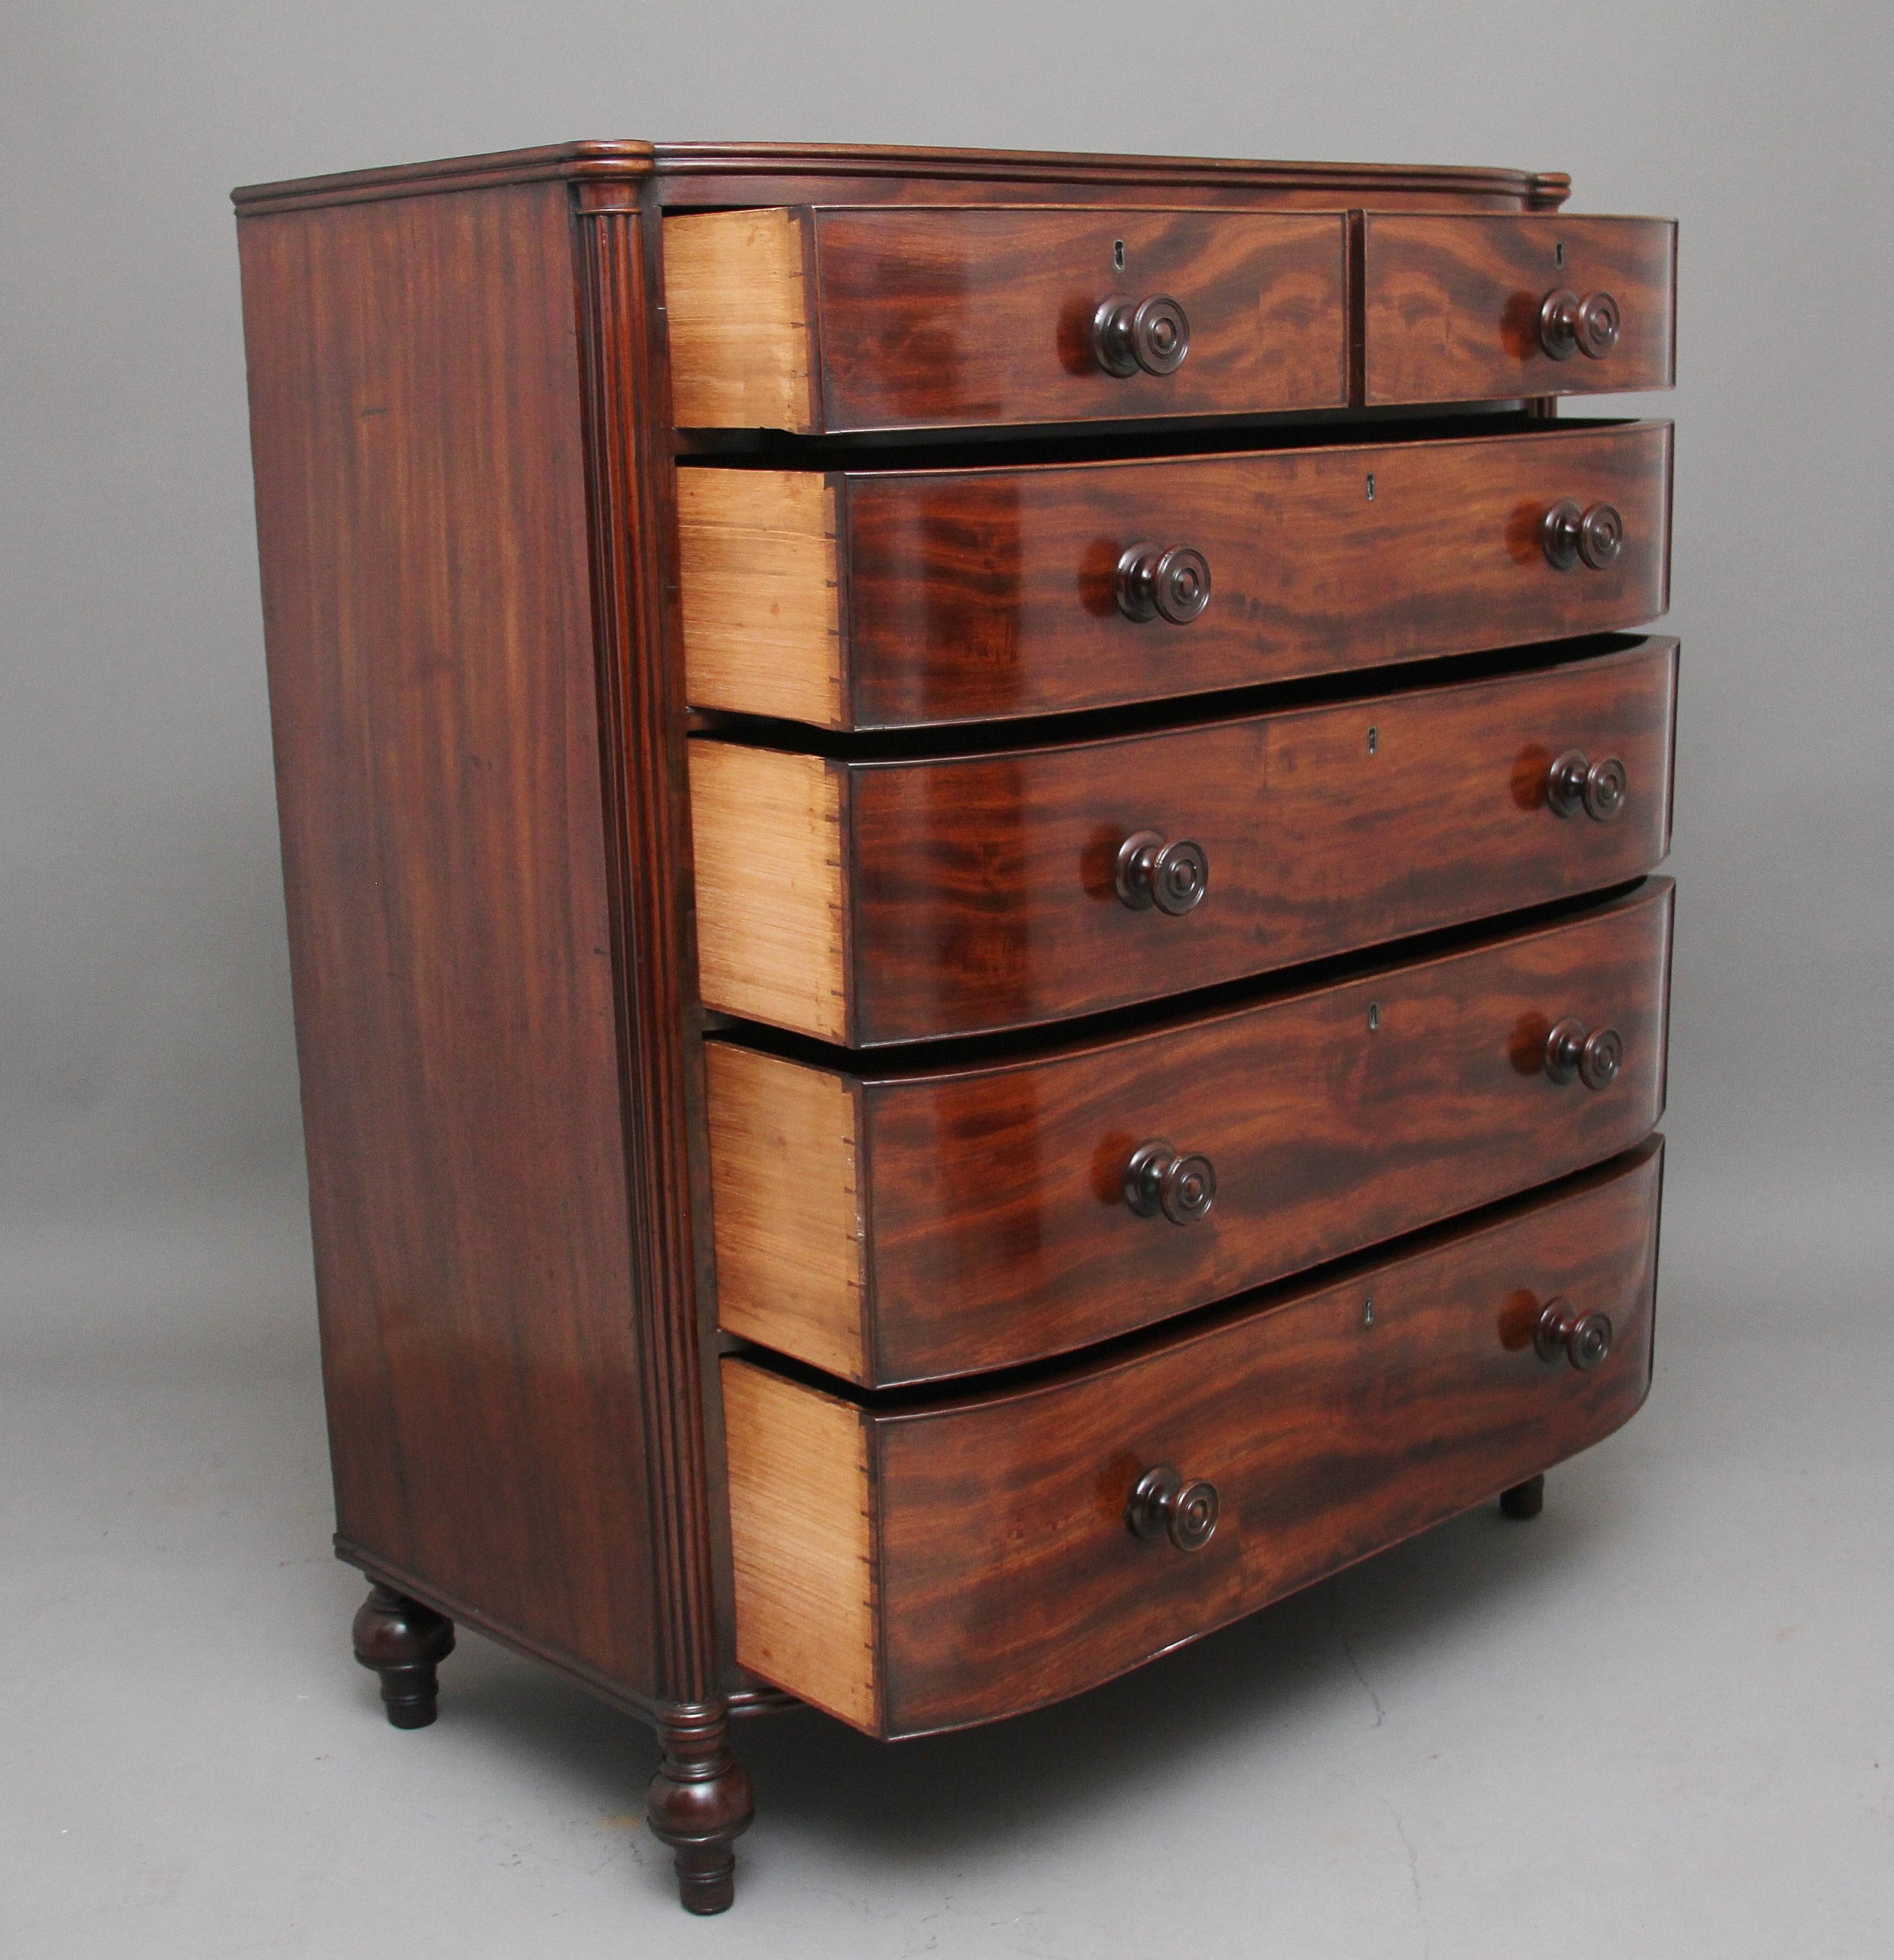 British Early 19th Century Flame Mahogany Chest of Drawers